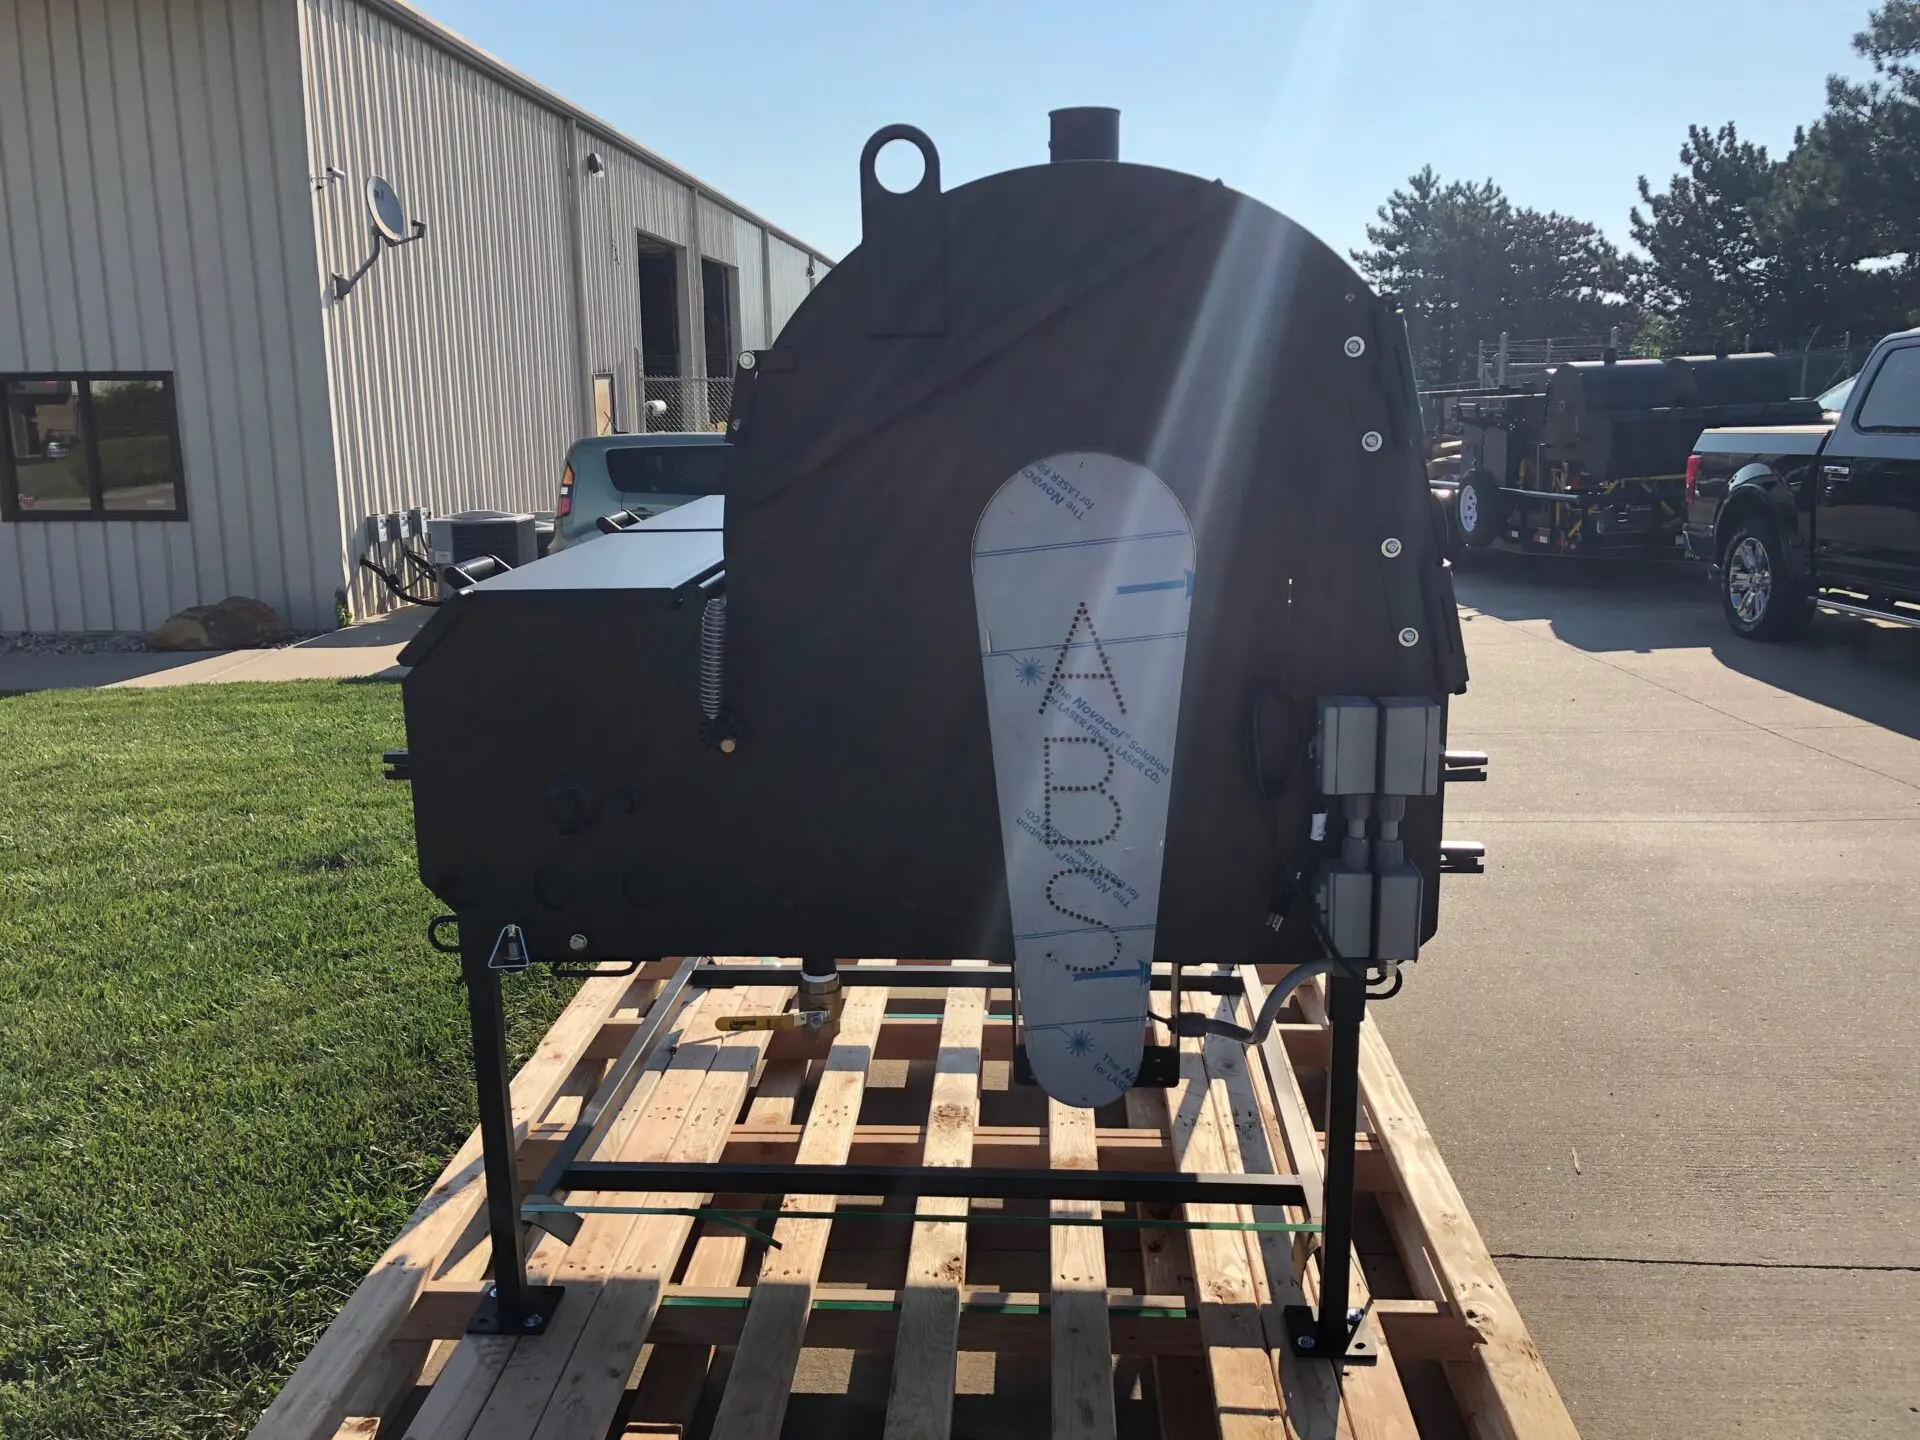 Grill and smoke bbq store, grills for sell near me, best smoke grill store near me, grills huntsville, judge 5ft near me, judge 4ft near me, pit boss near me, best smoker near me, best bbq sauce, best bbq rubs, high end grill, high end smoker, Patrick Pearson, 35805, 35816, 35759, 35601,